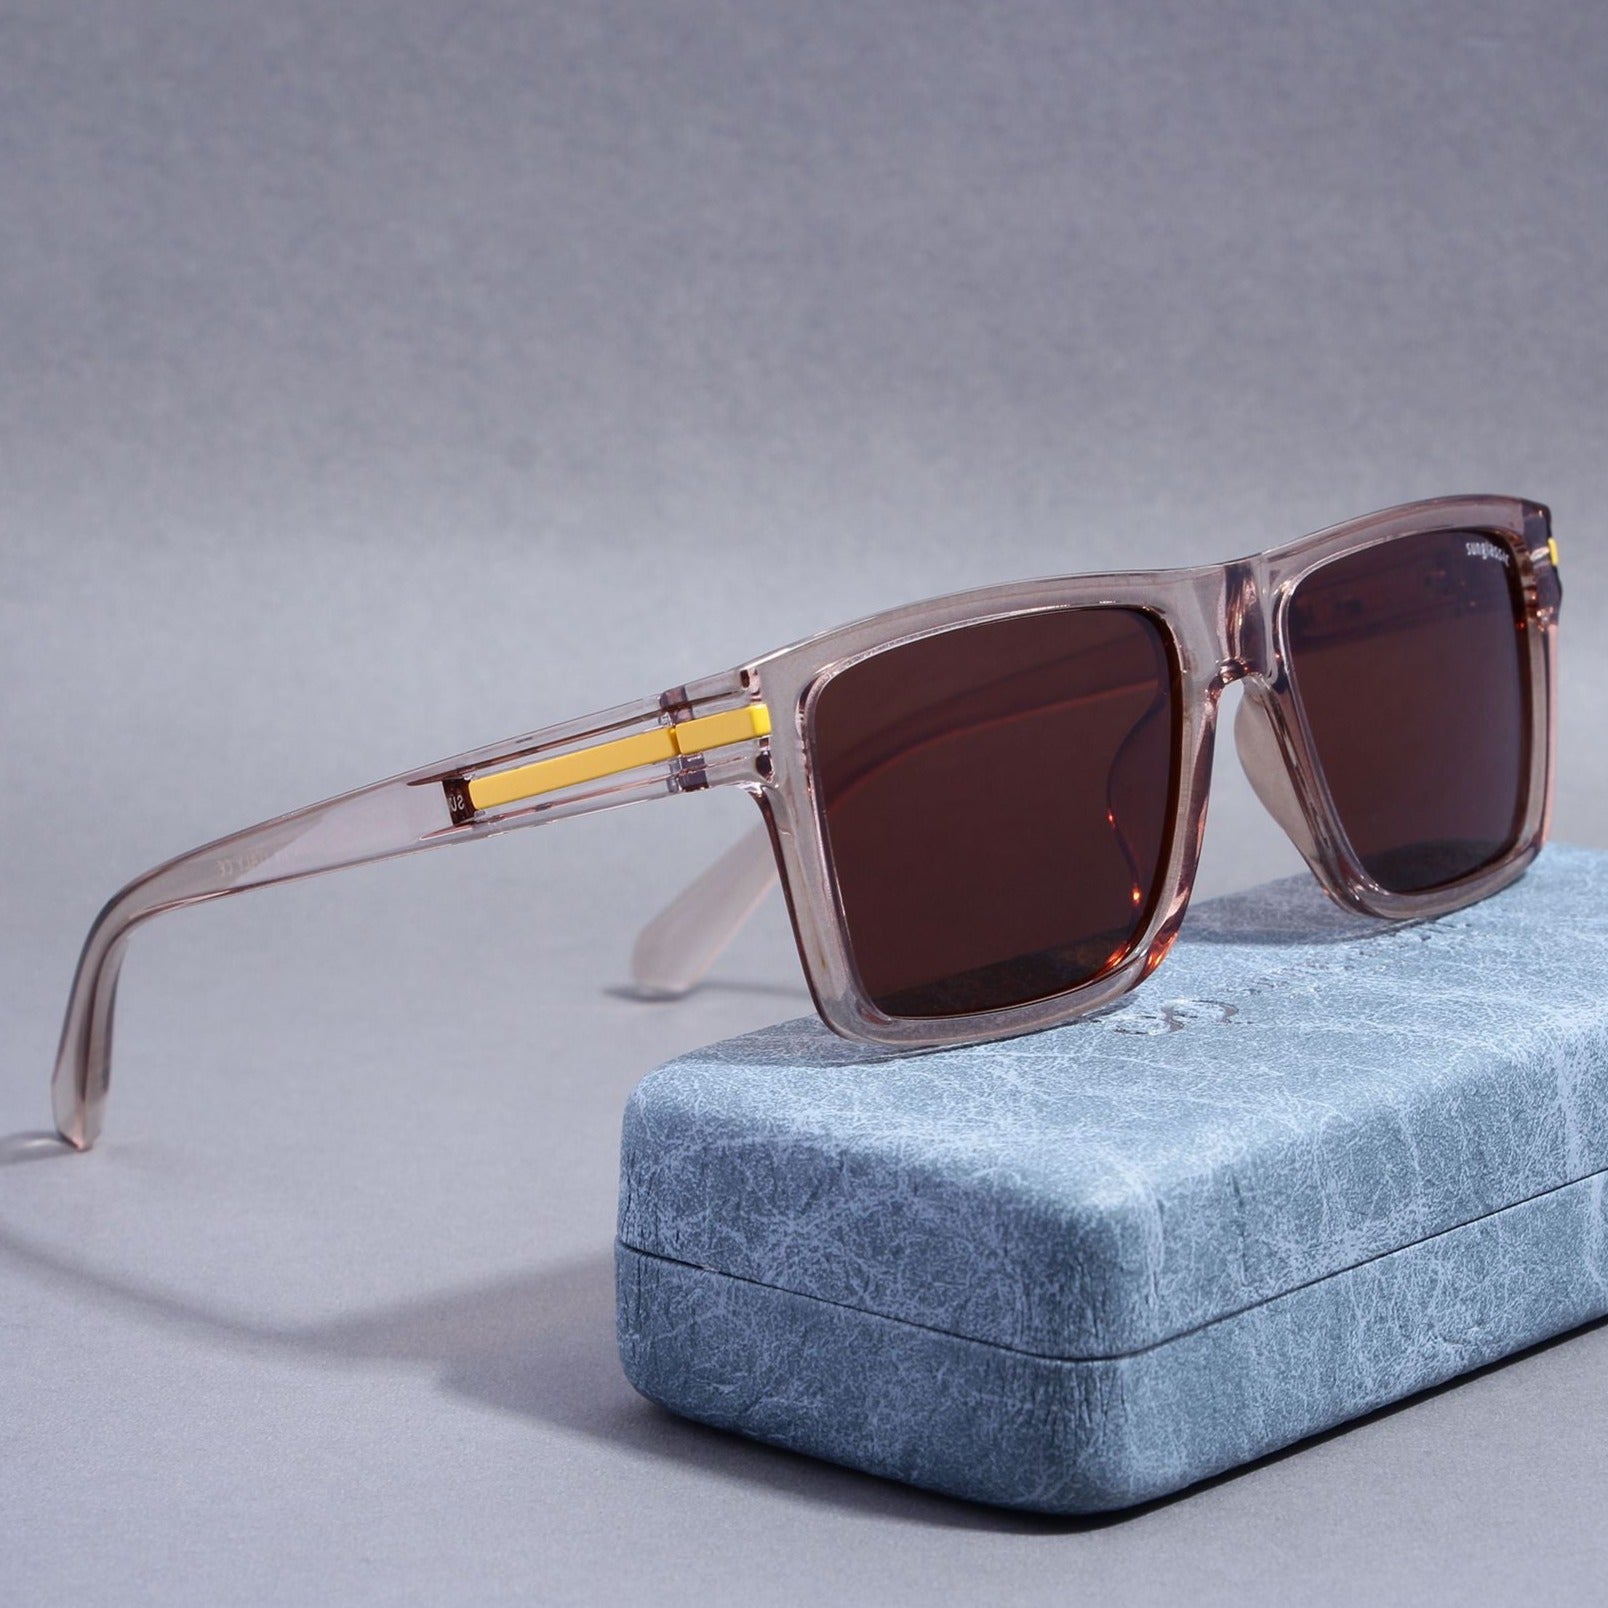 Twister Brown Polarized Rectangle TR90 Sunglasses